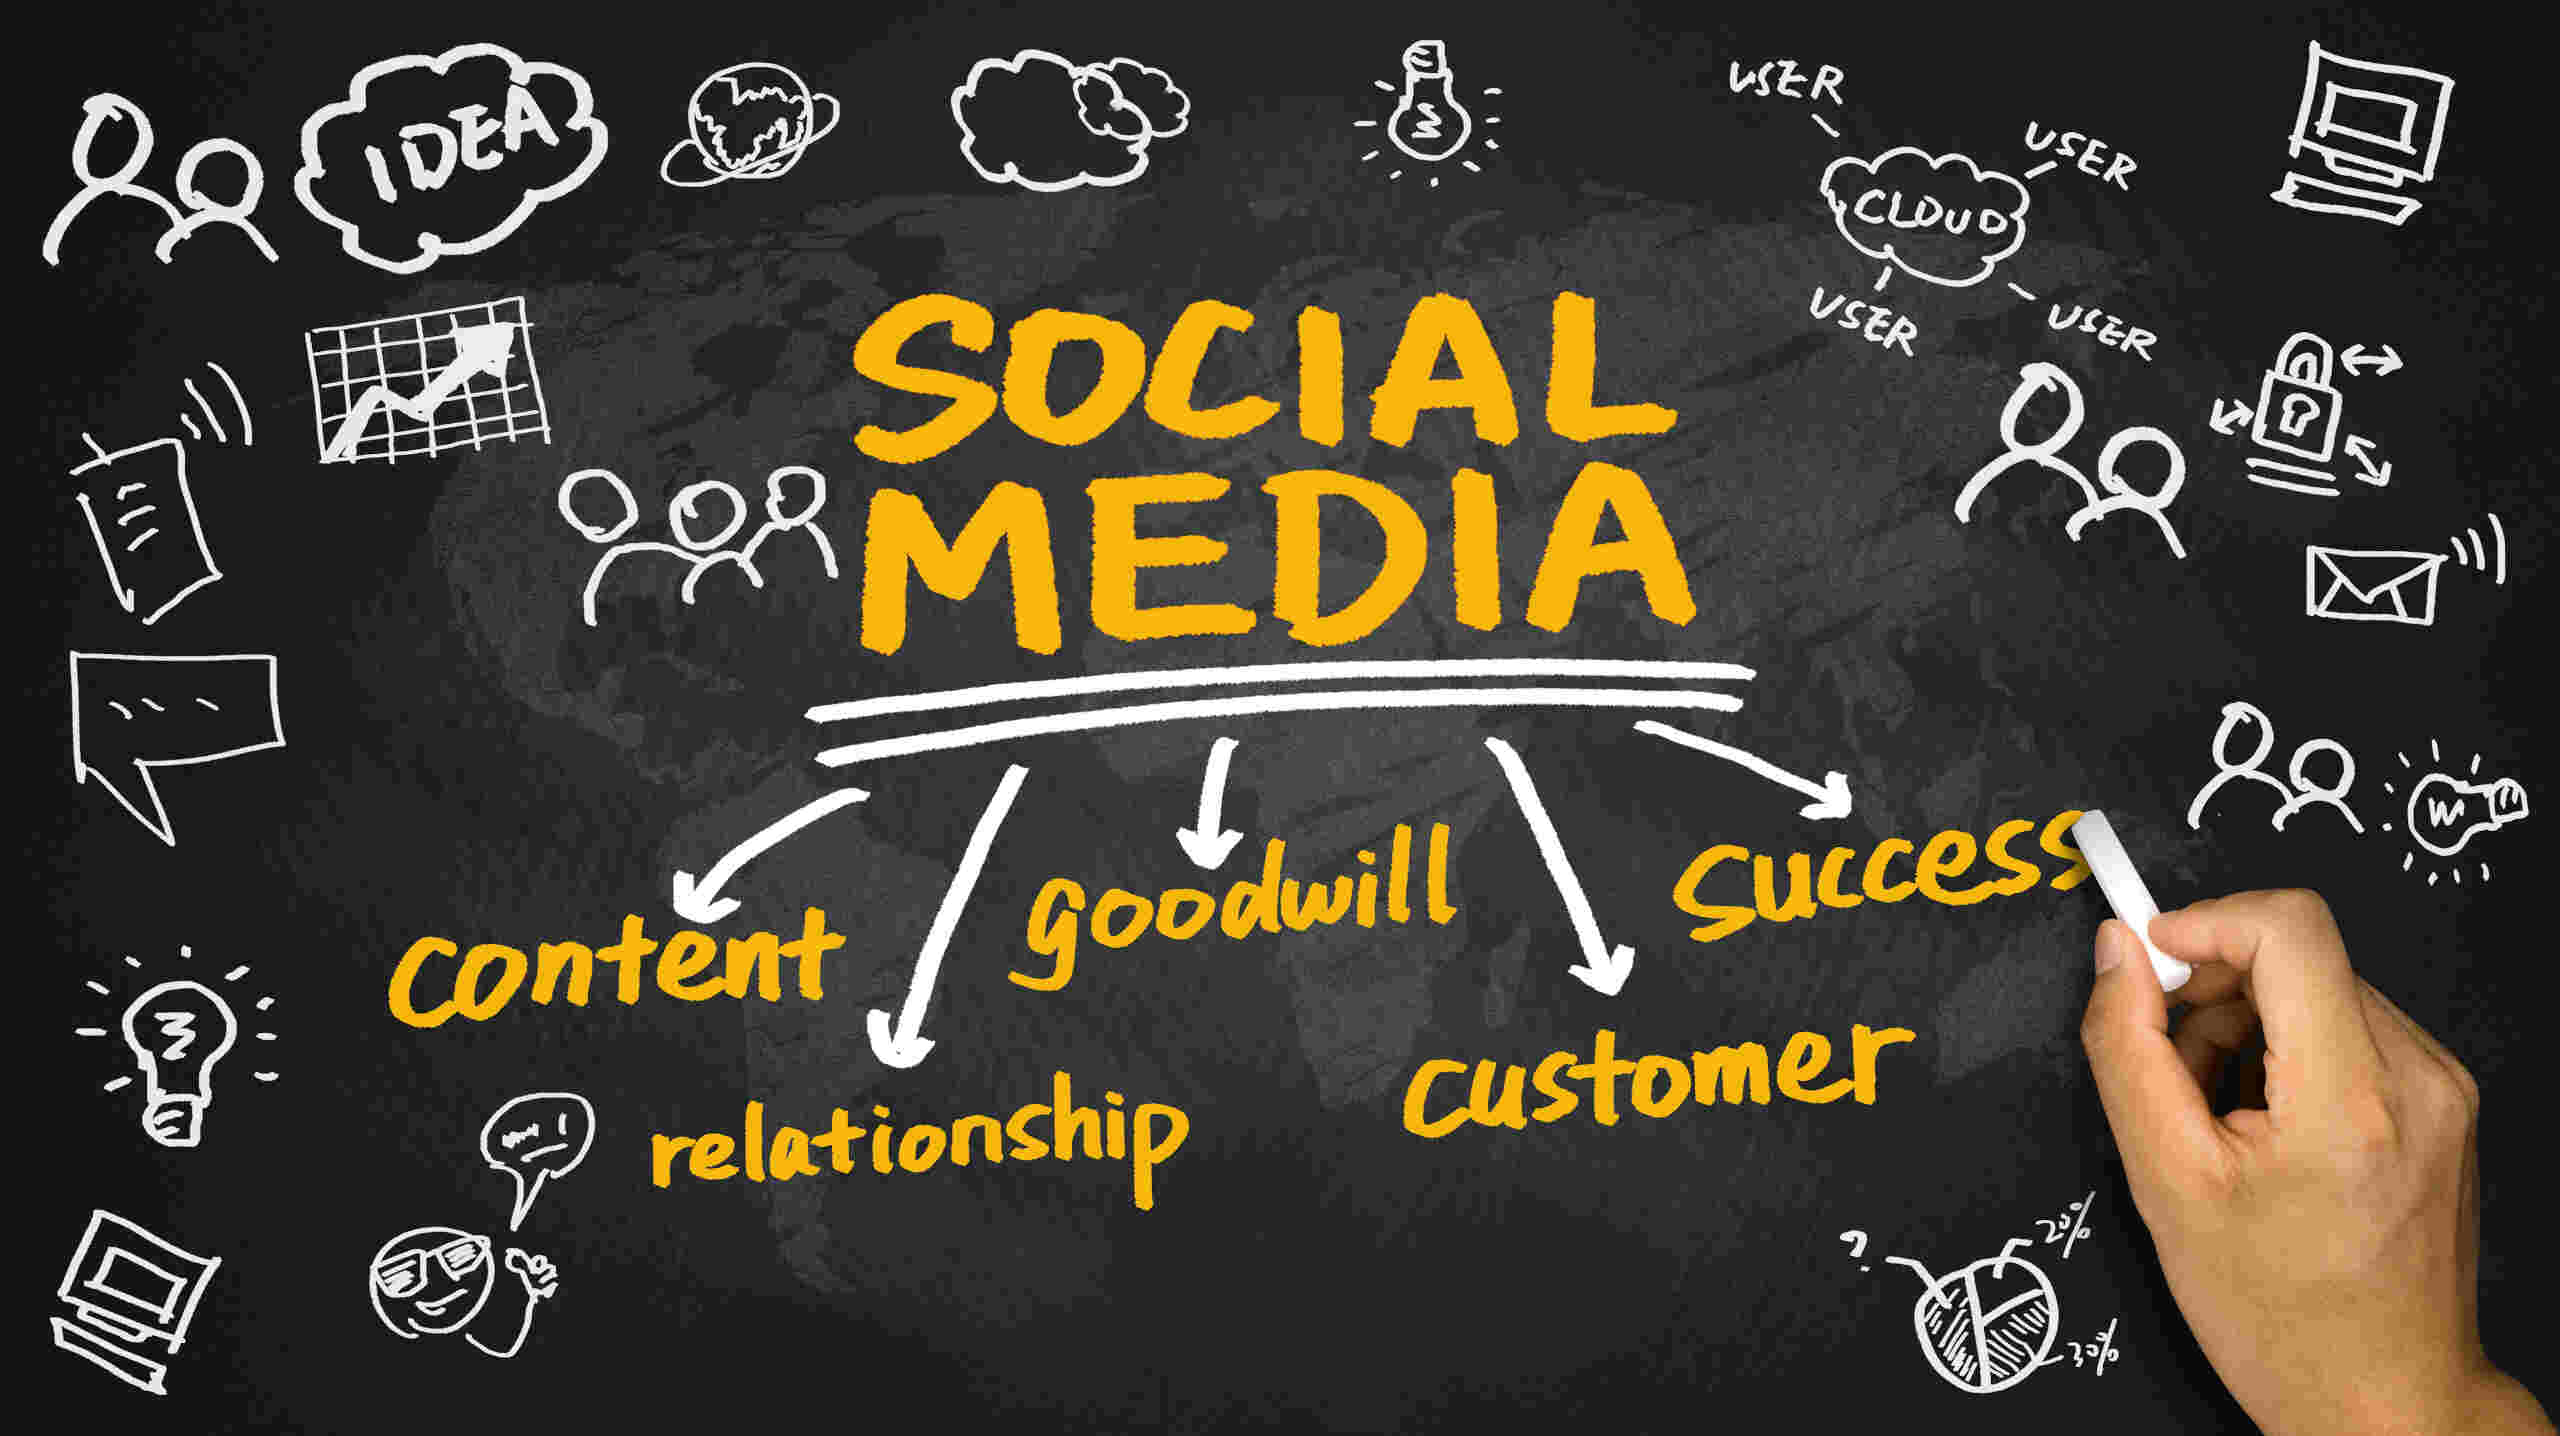 Social Media Marketing: An Idealistic Approach For Your Business